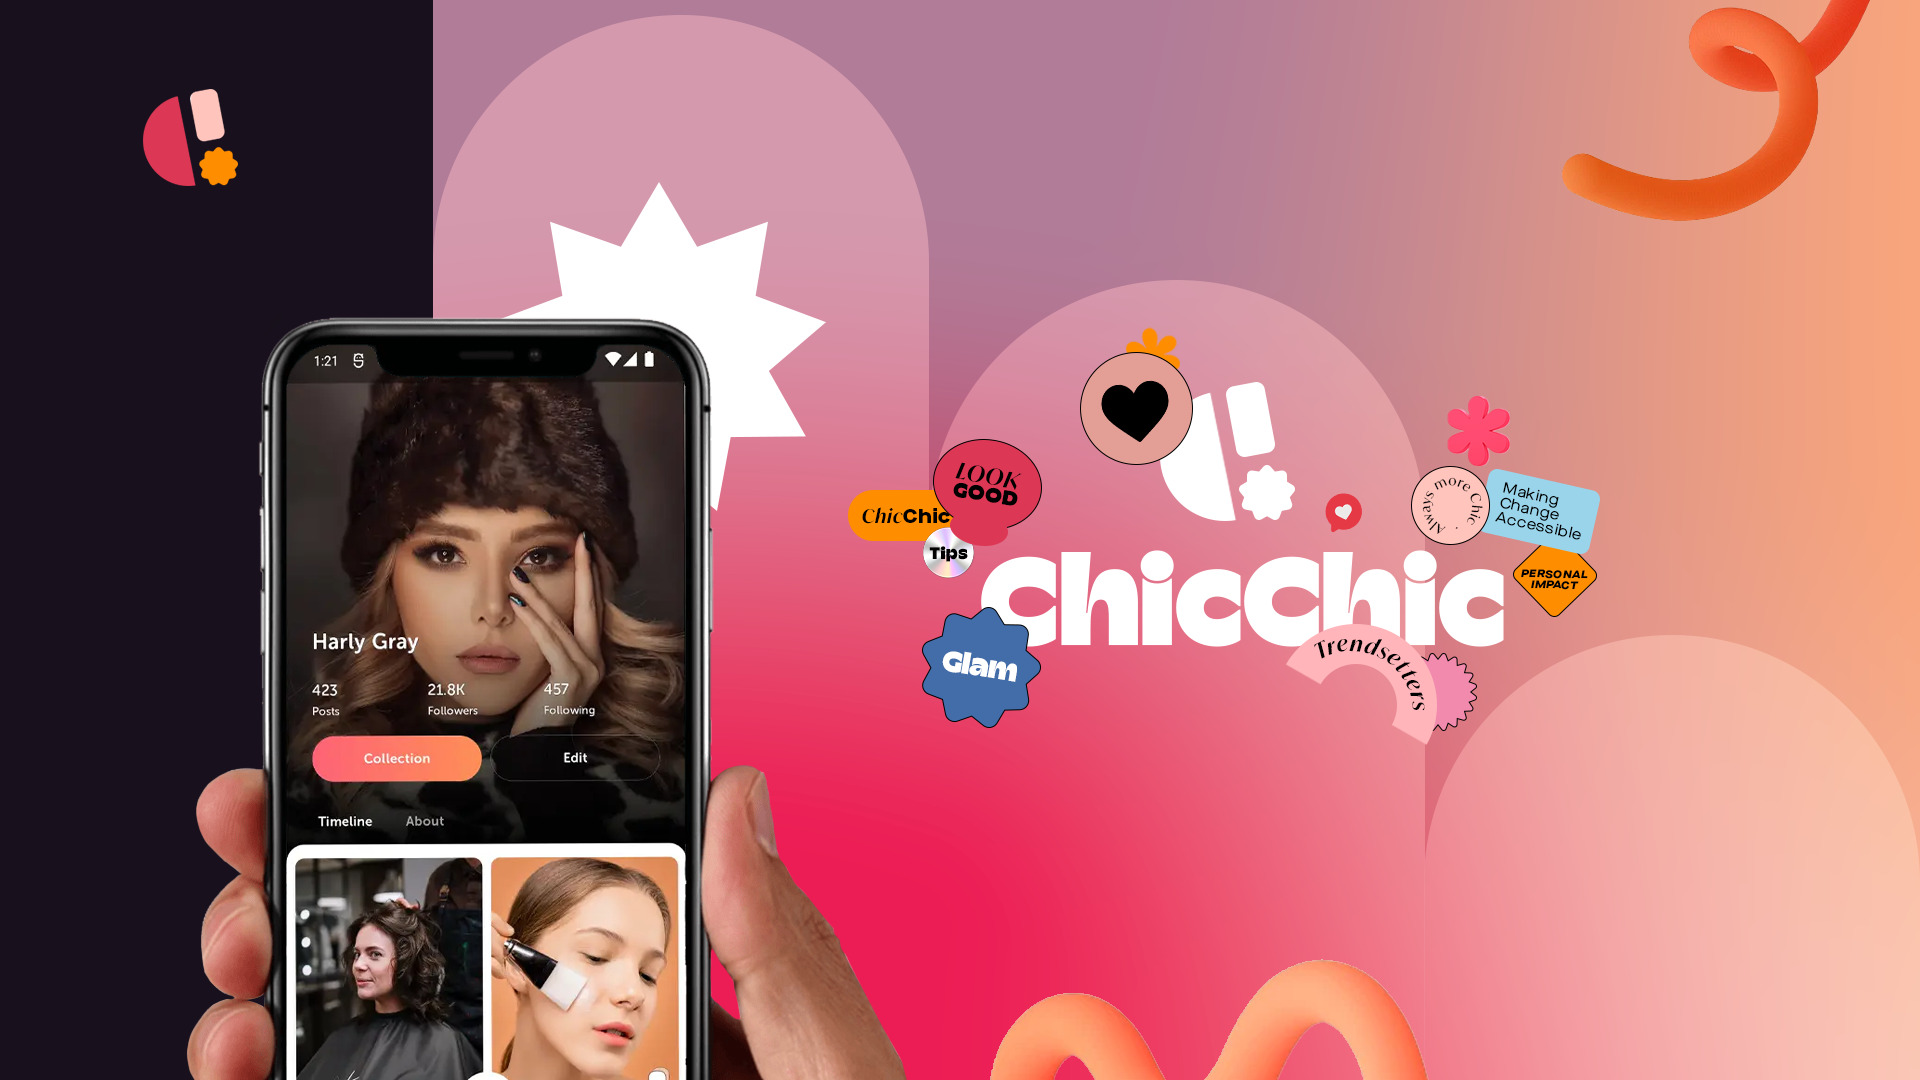 ChicChic a Beauty Social Platform Rebranding Designed by Ismail Taibouta